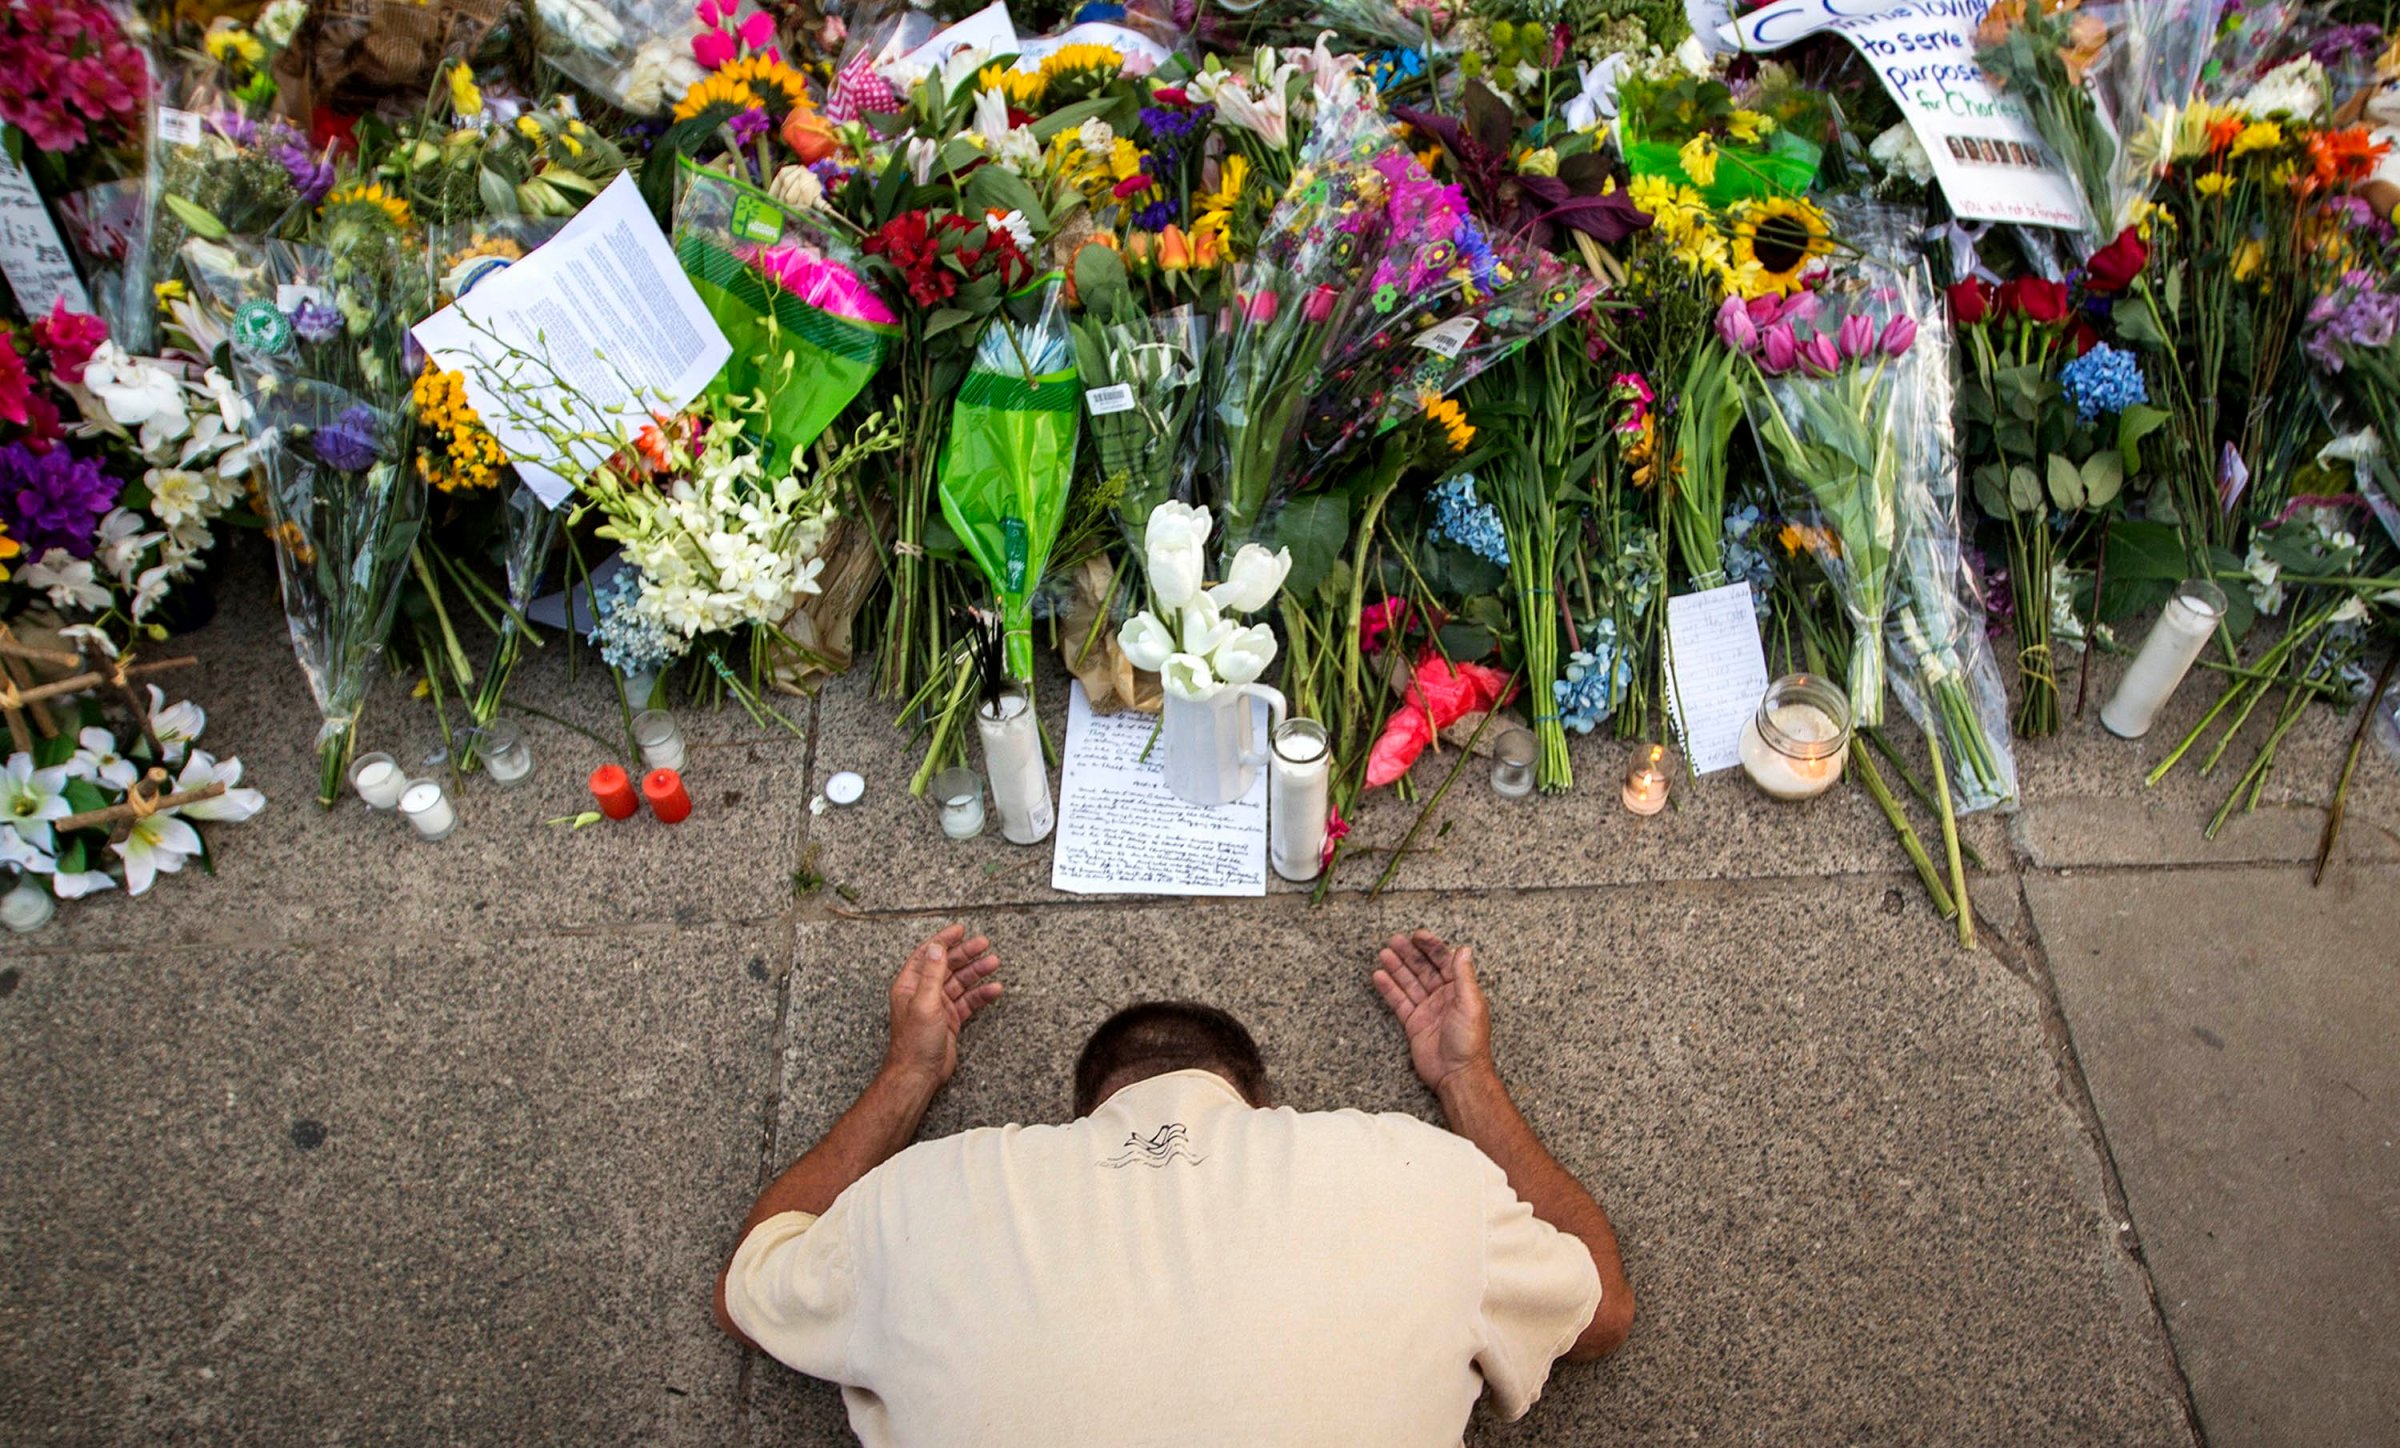 charleston-shooting-mourning-victims-racism